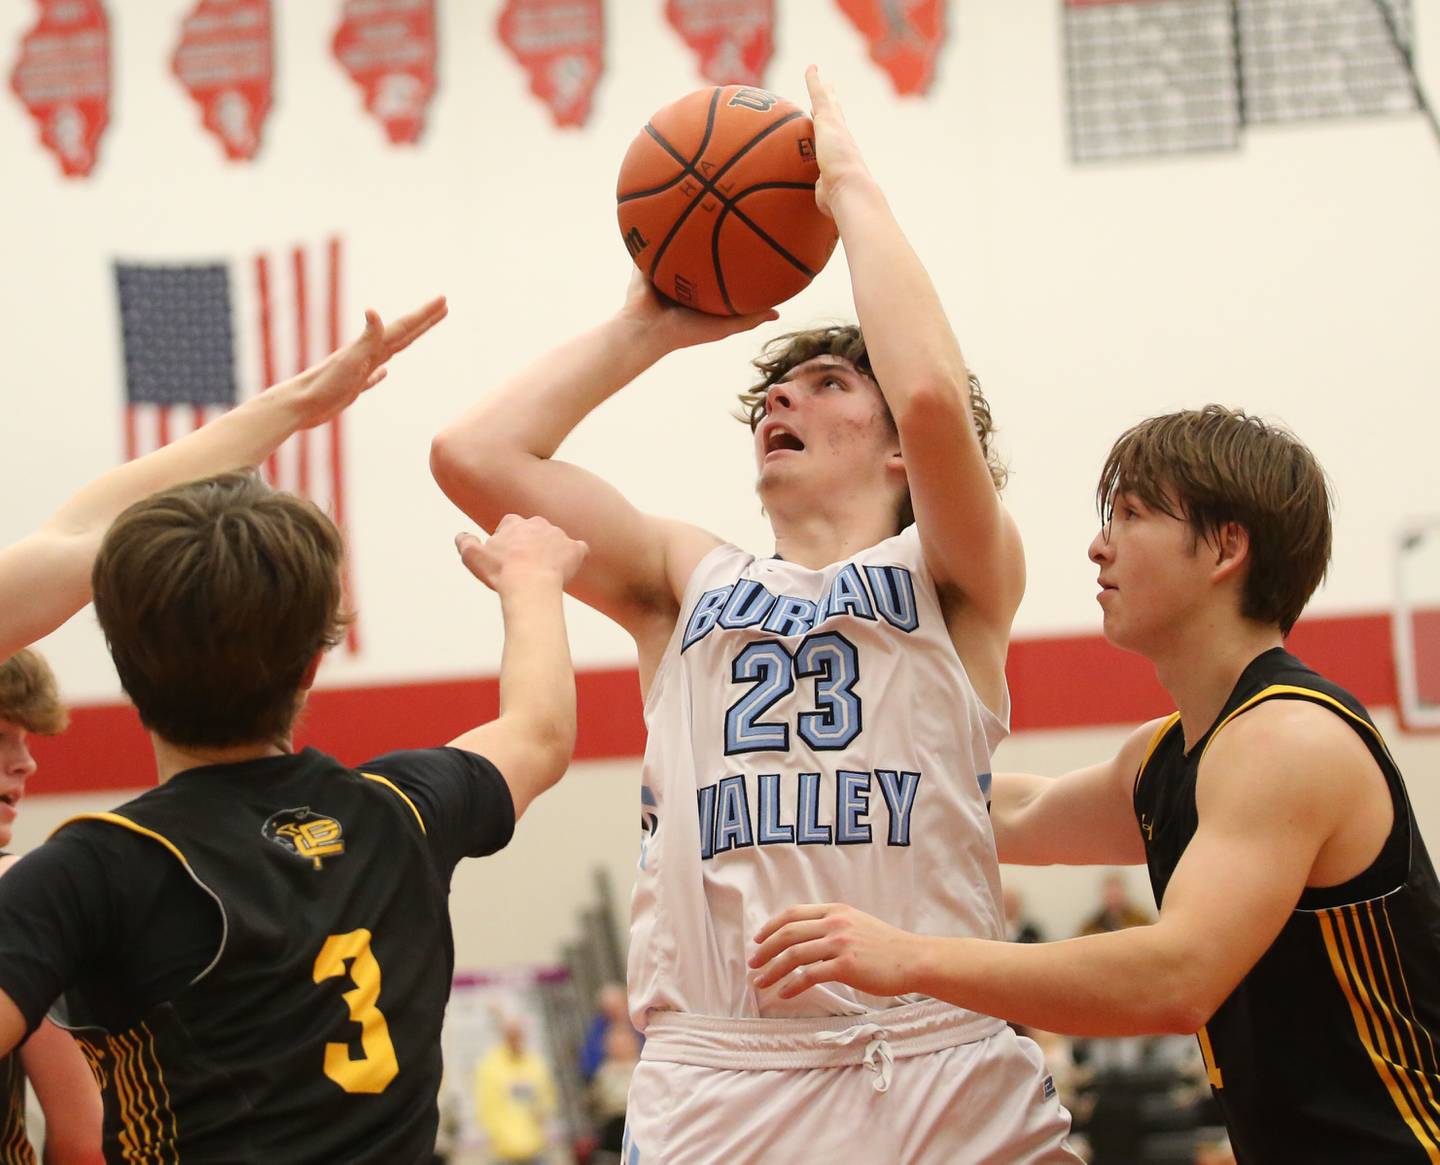 Bureau Valley's Landen Birdsley eyes the hoop while being guarded by Putnam County's Bryce Smith and teammate Owen Saepharn during the 49th annual Colmone Class on Thursday, Dec. 7, 2023 at Hall High School.